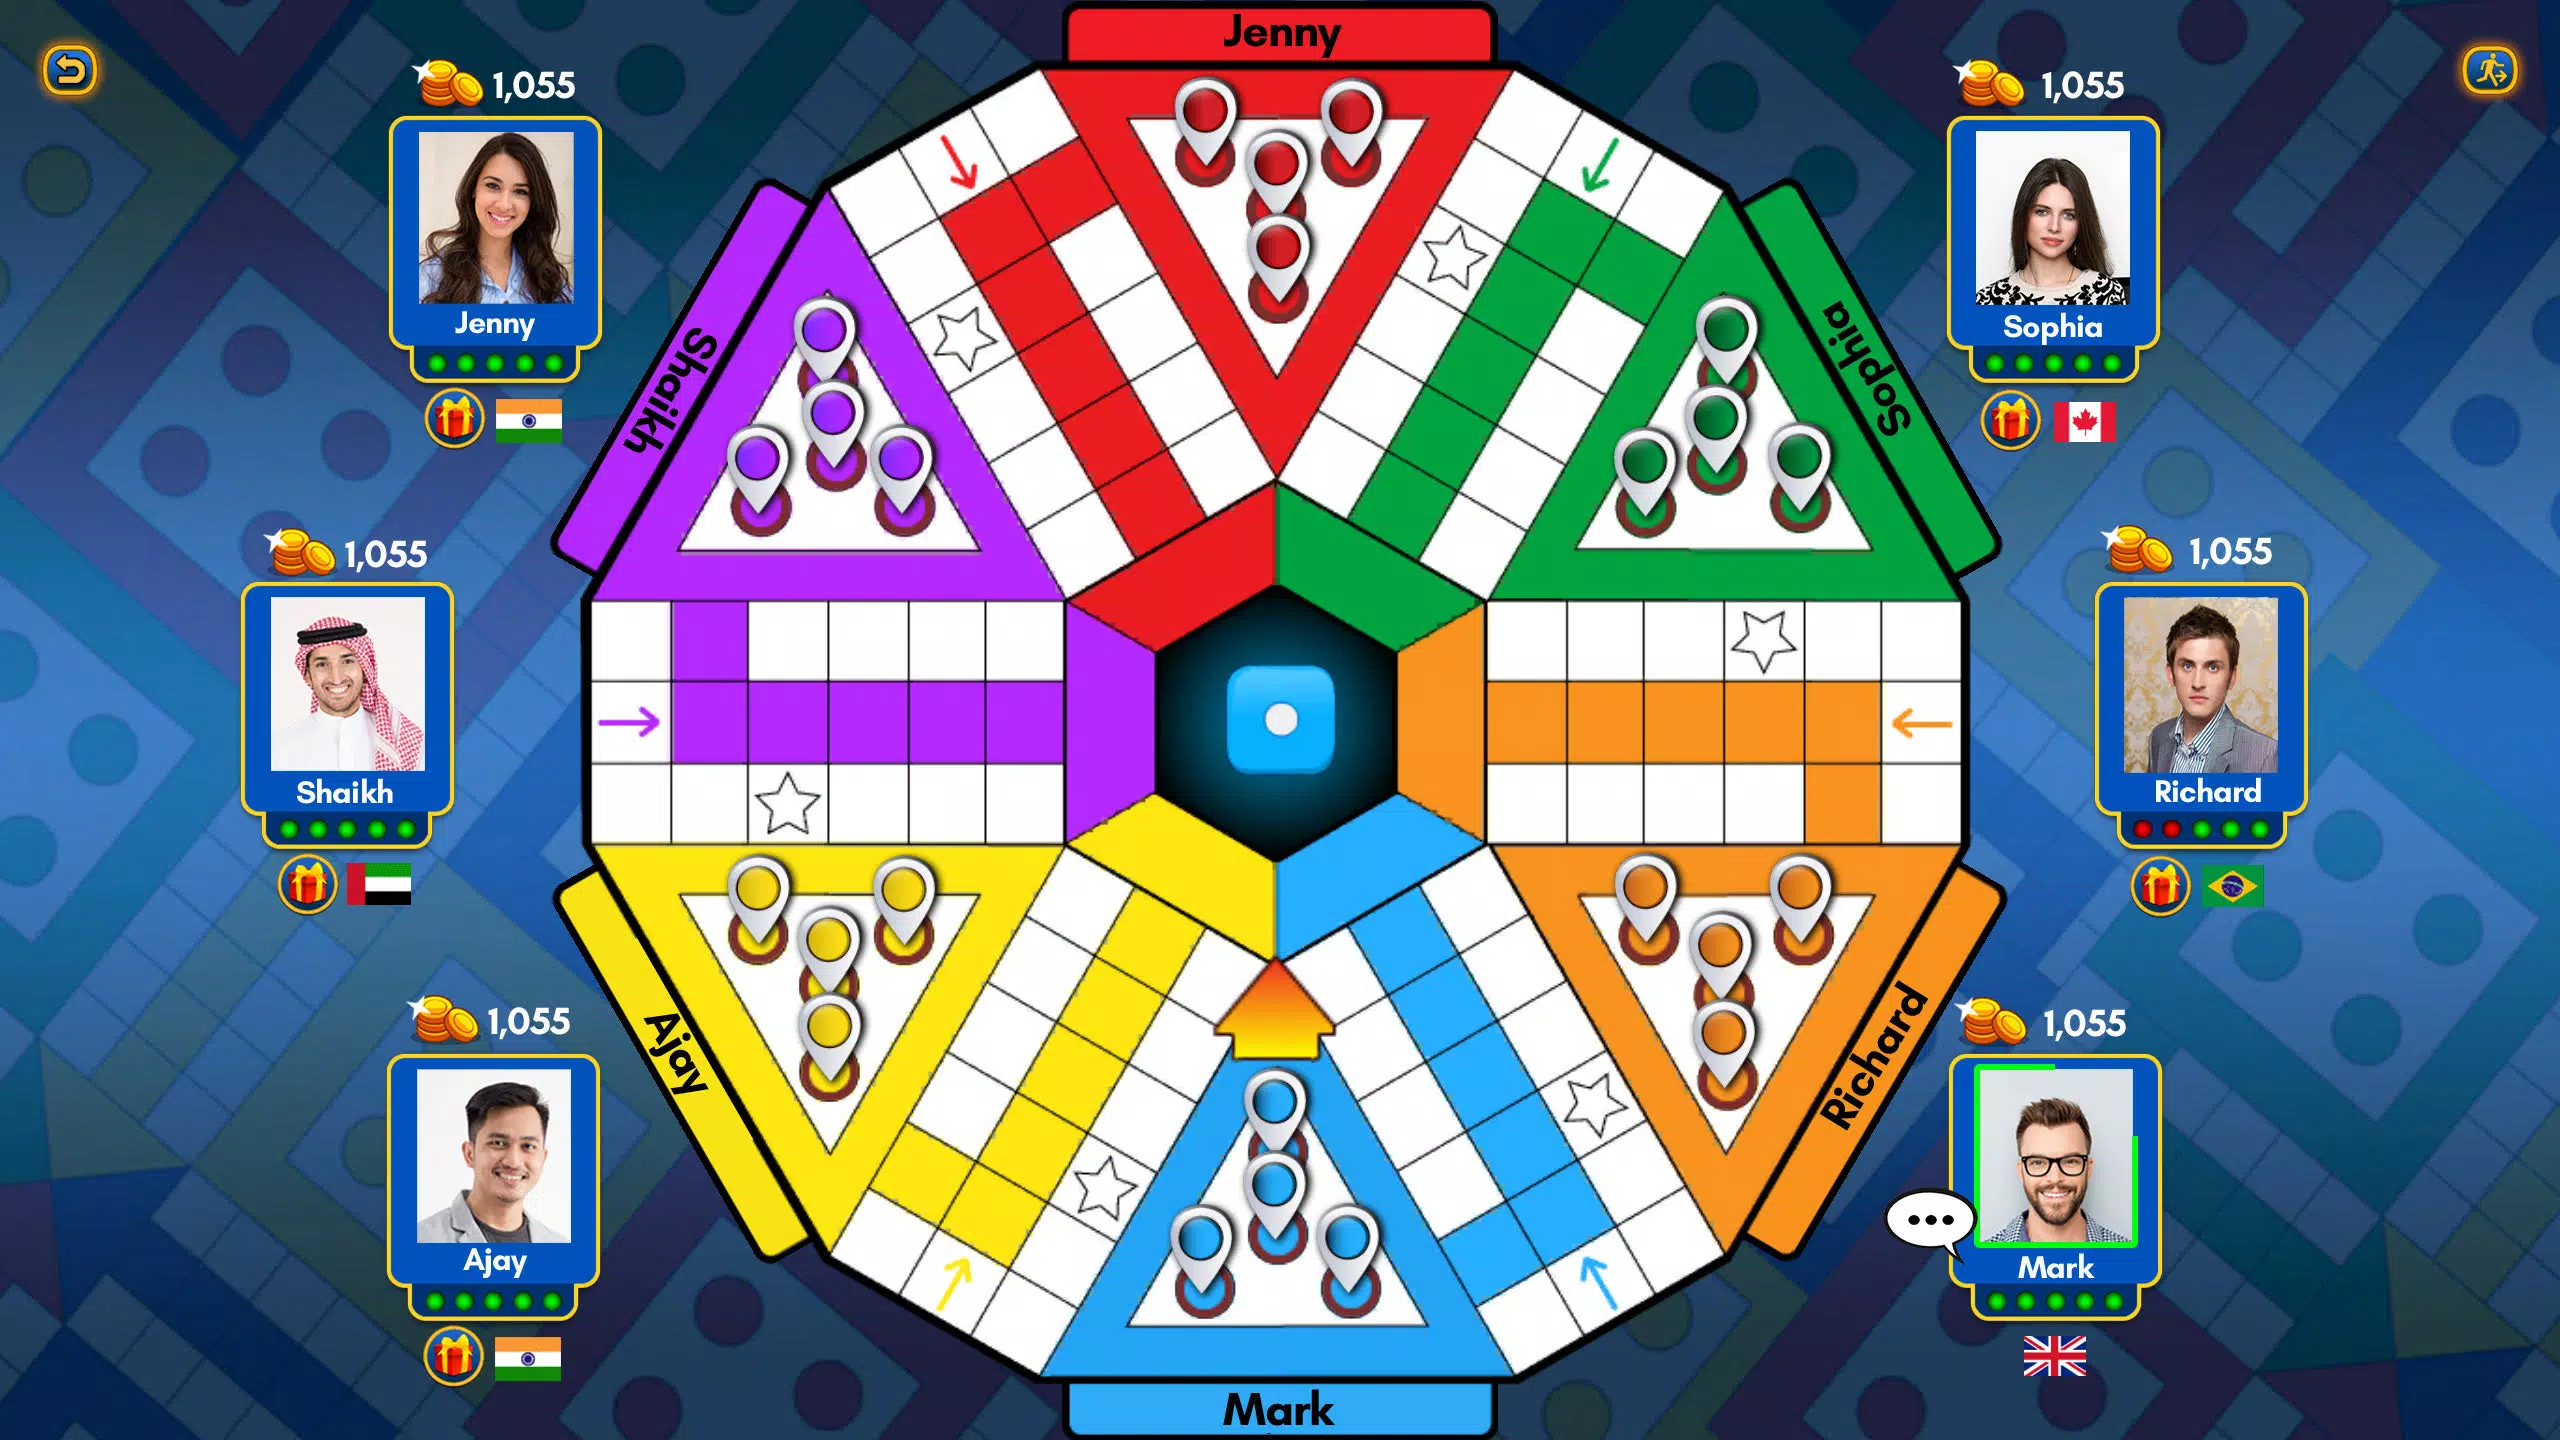 Play with international friends in ludo king